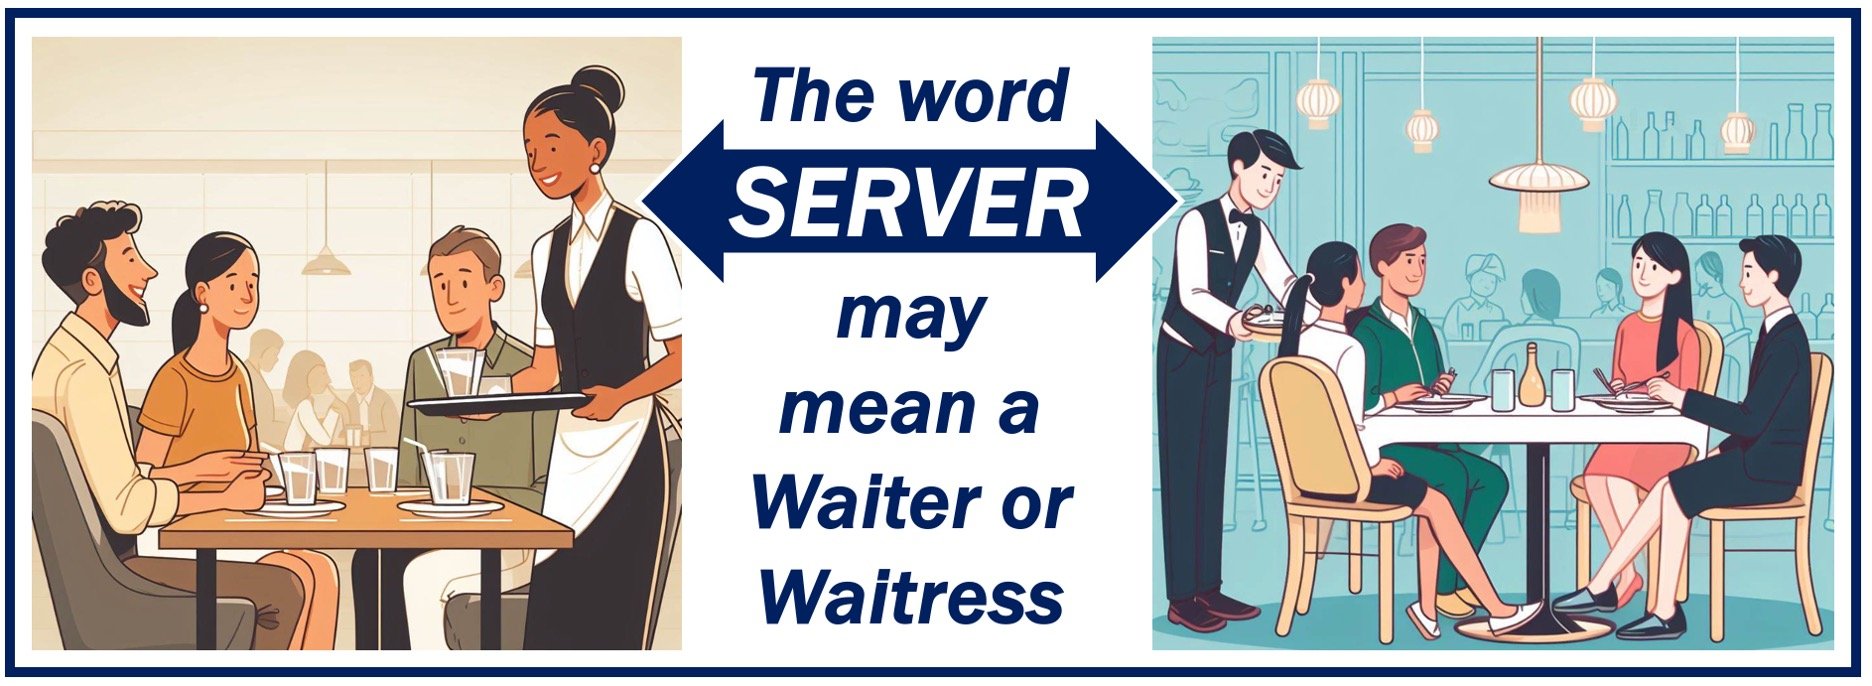 Two images of a waiter and a waitress serving customers - they could be called servers